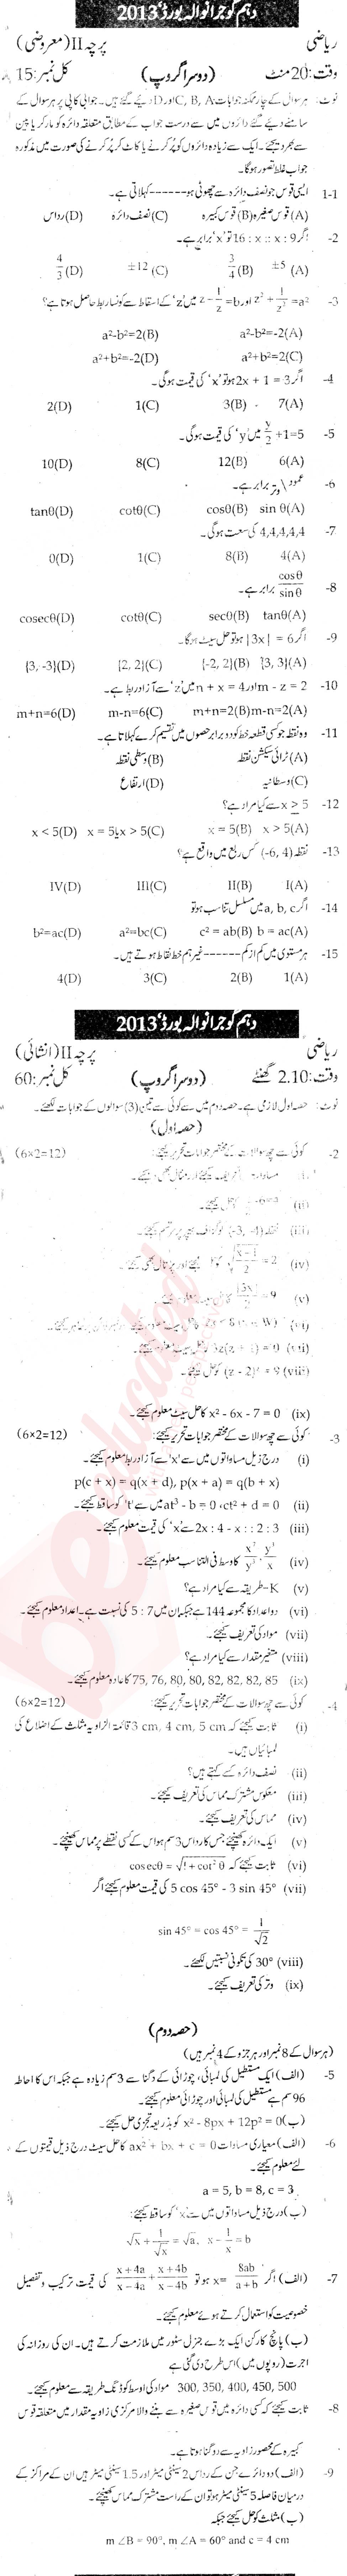 Math 10th class Past Paper Group 2 BISE Gujranwala 2013